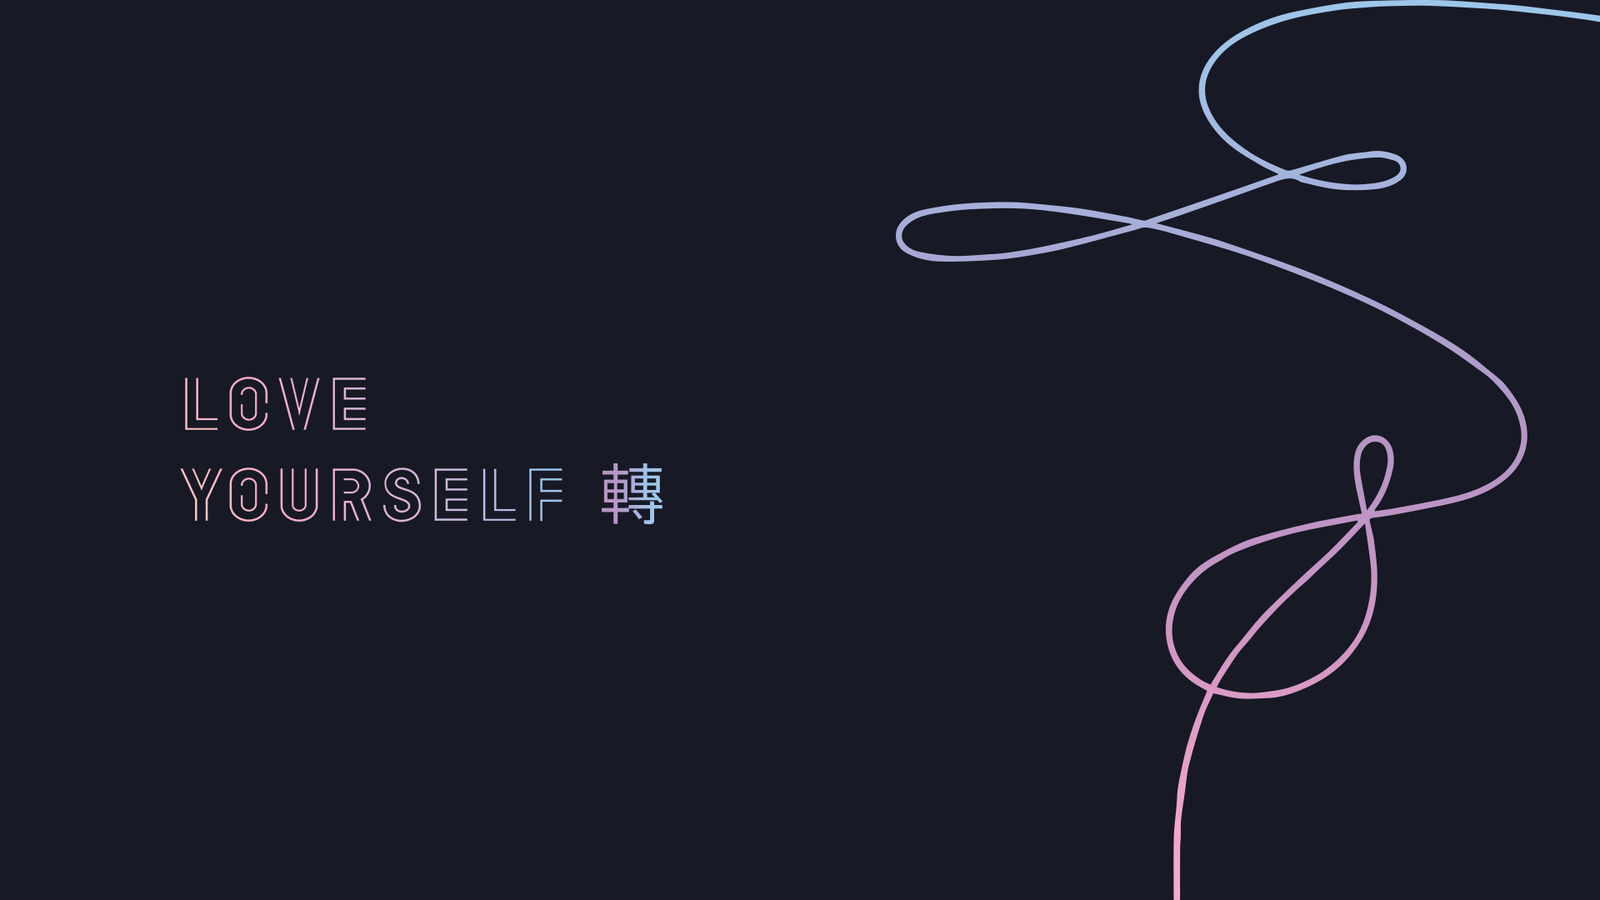 Bts Love Yourself Tear Wallpaper By Jeshdesign Dcbvfud.png